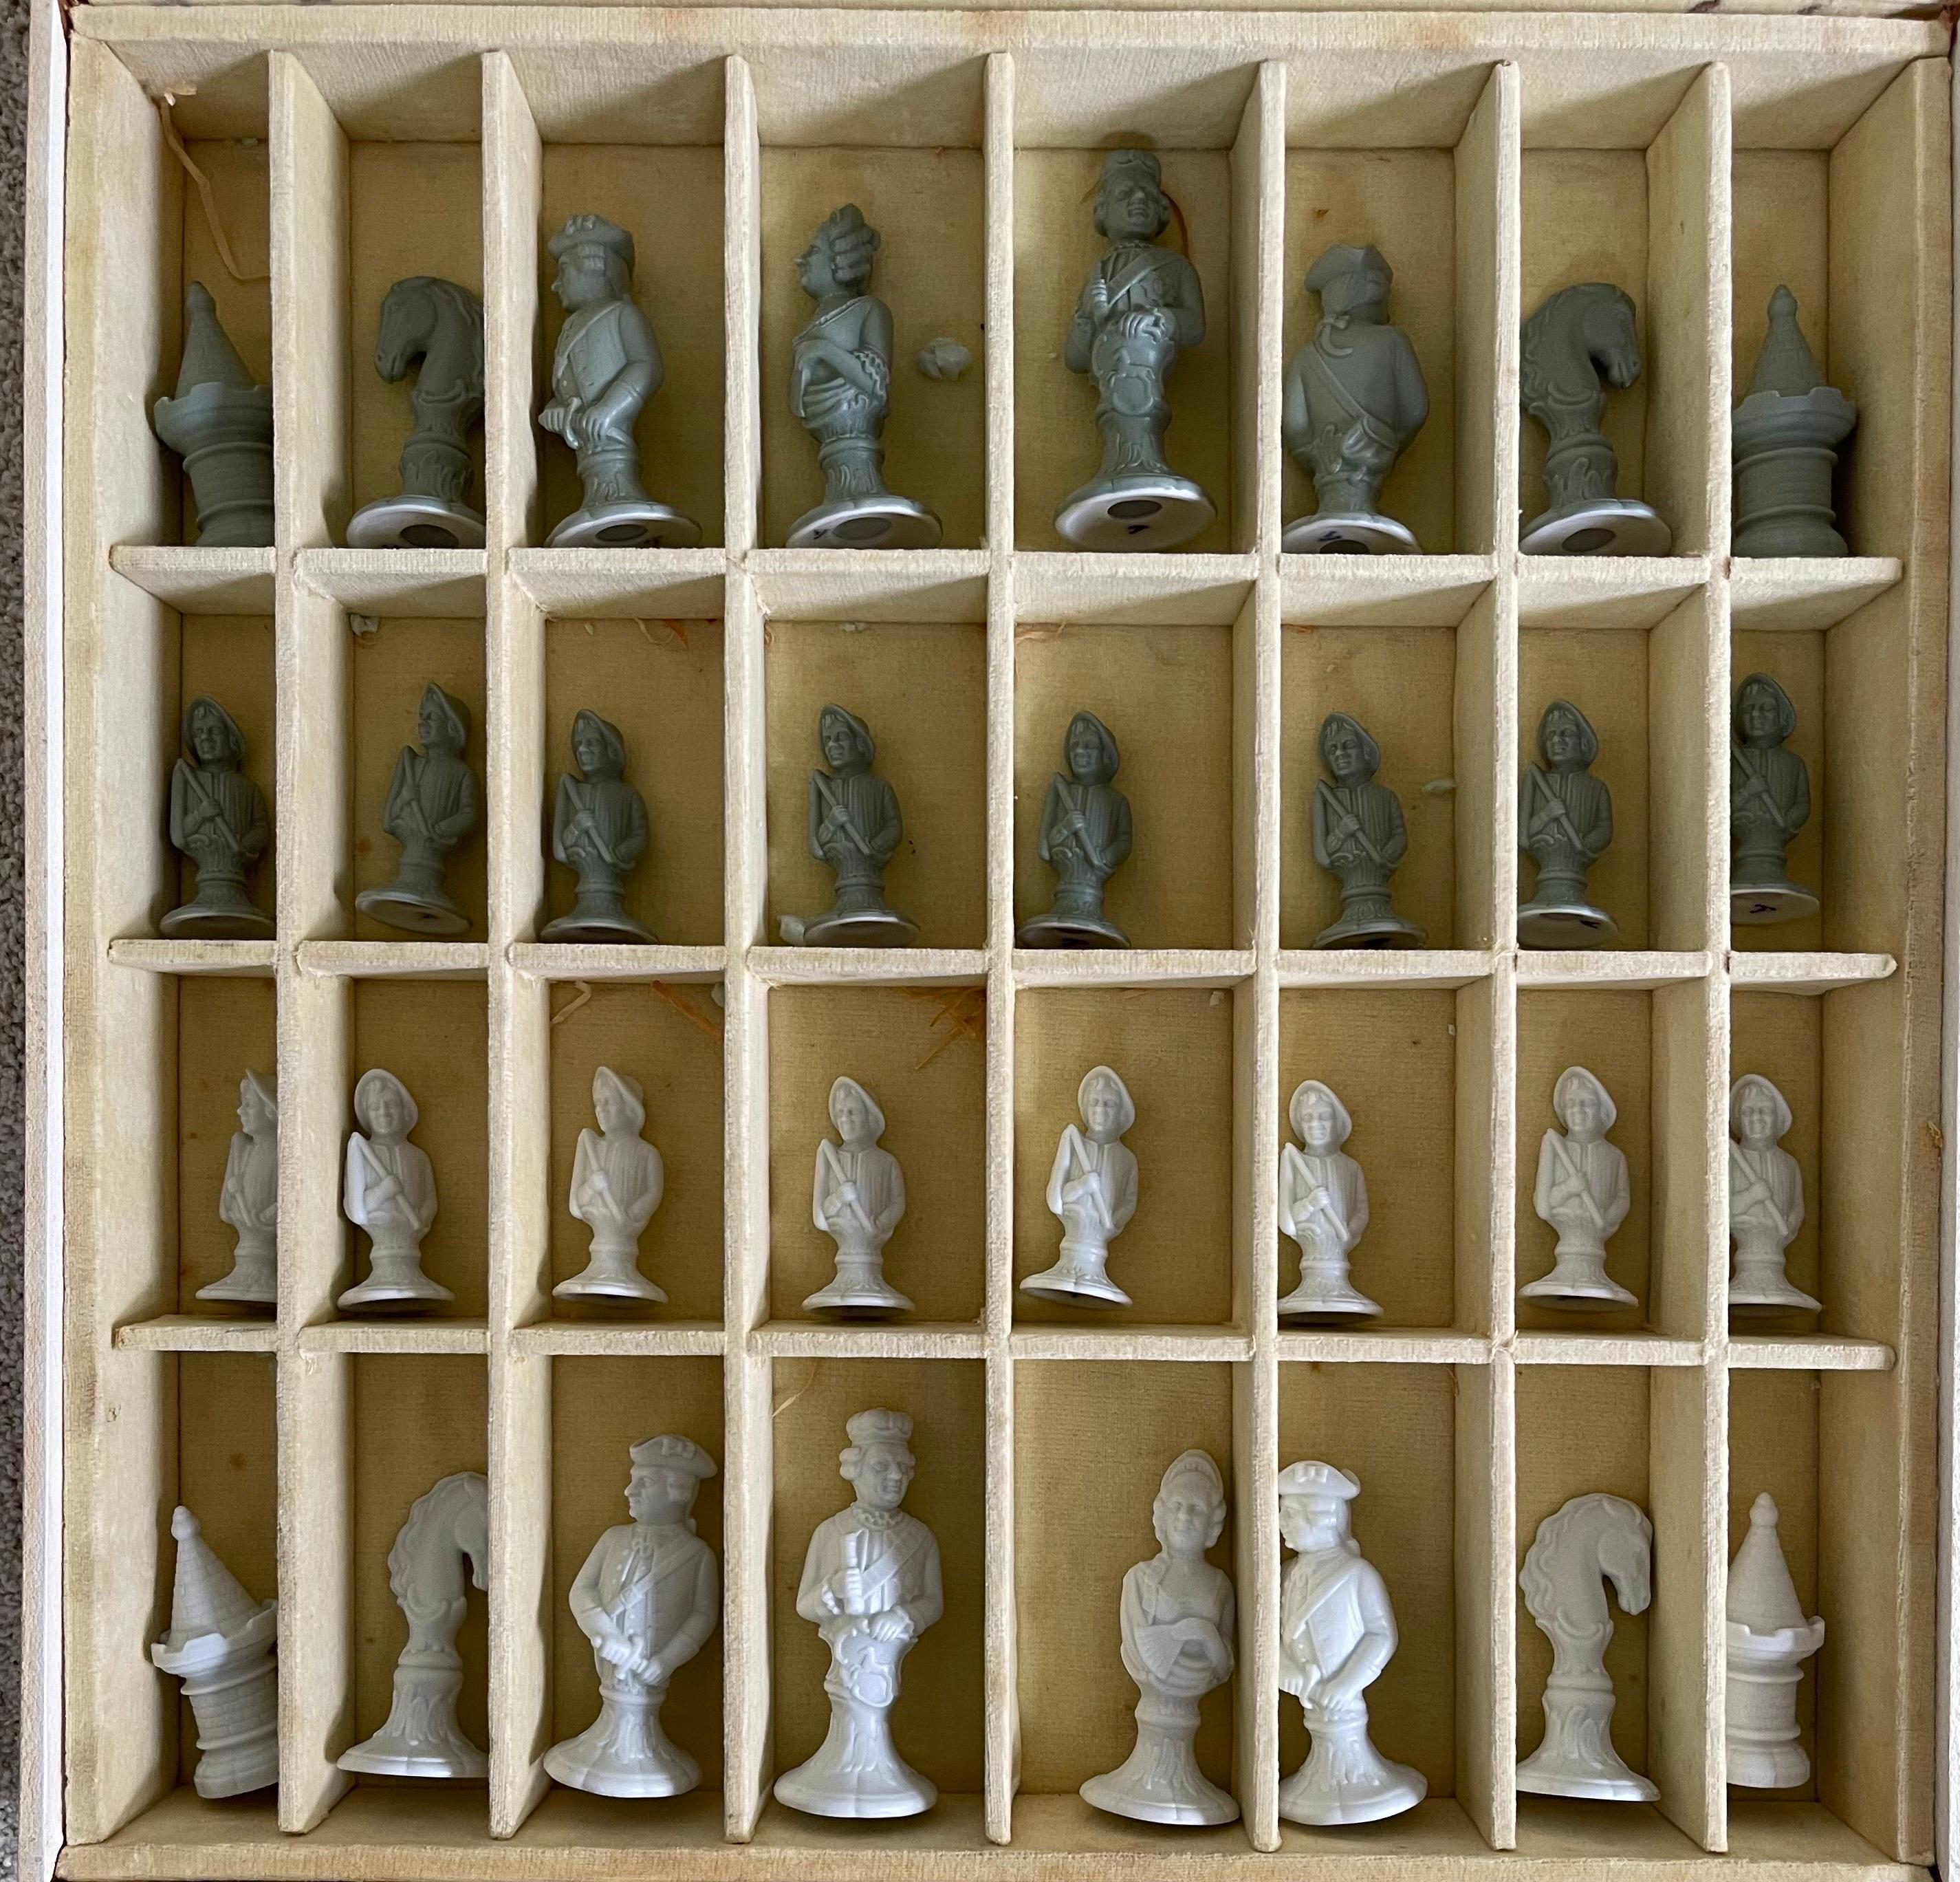 Vintage Bisque Porcelain Chess Set with Etched Glass Board by Furstenberg  For Sale 10